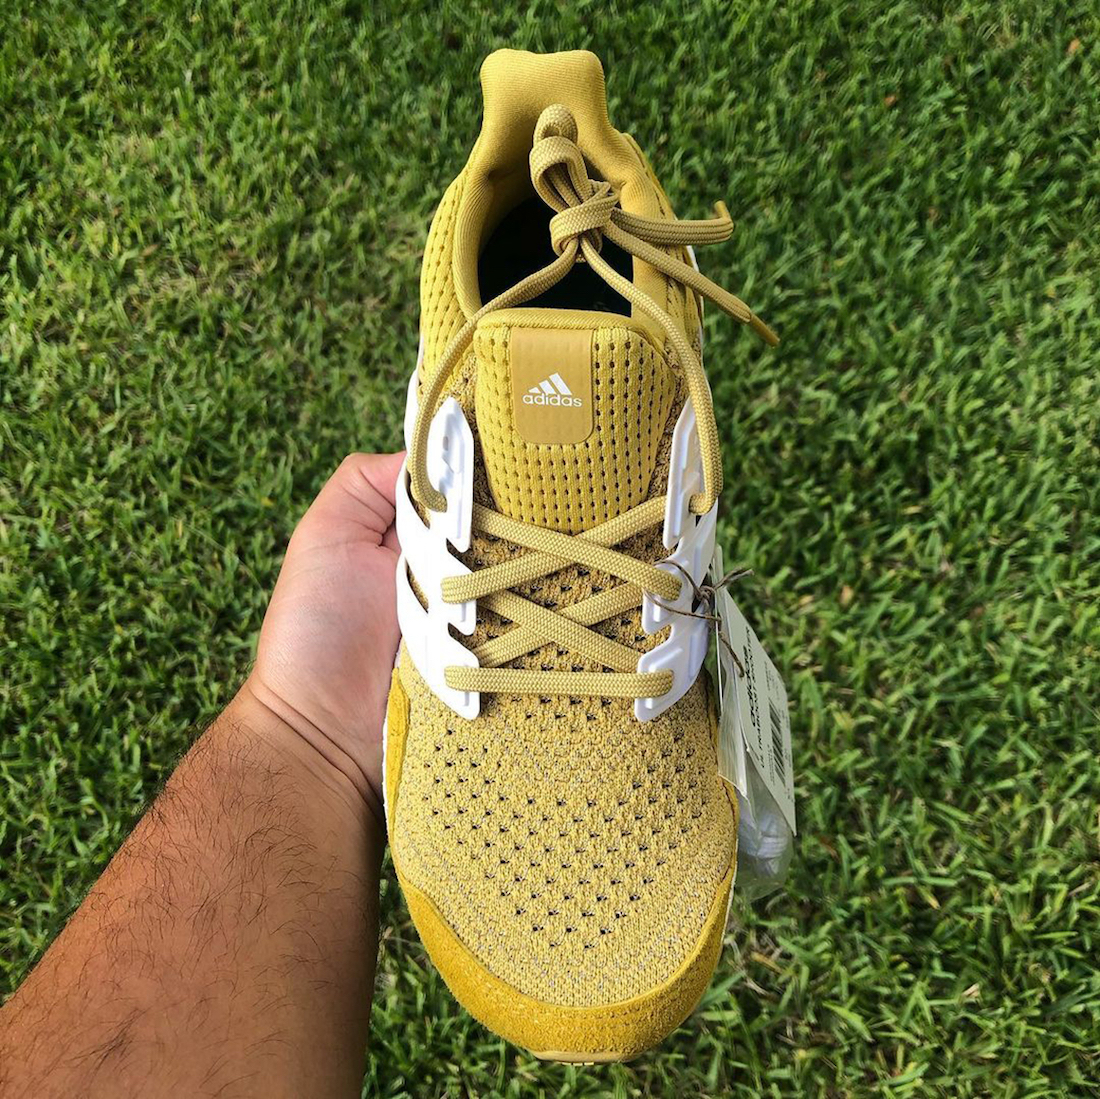 Extra Butter Happy Gilmore adidas Ultra Boost Gold Jacket Release Date